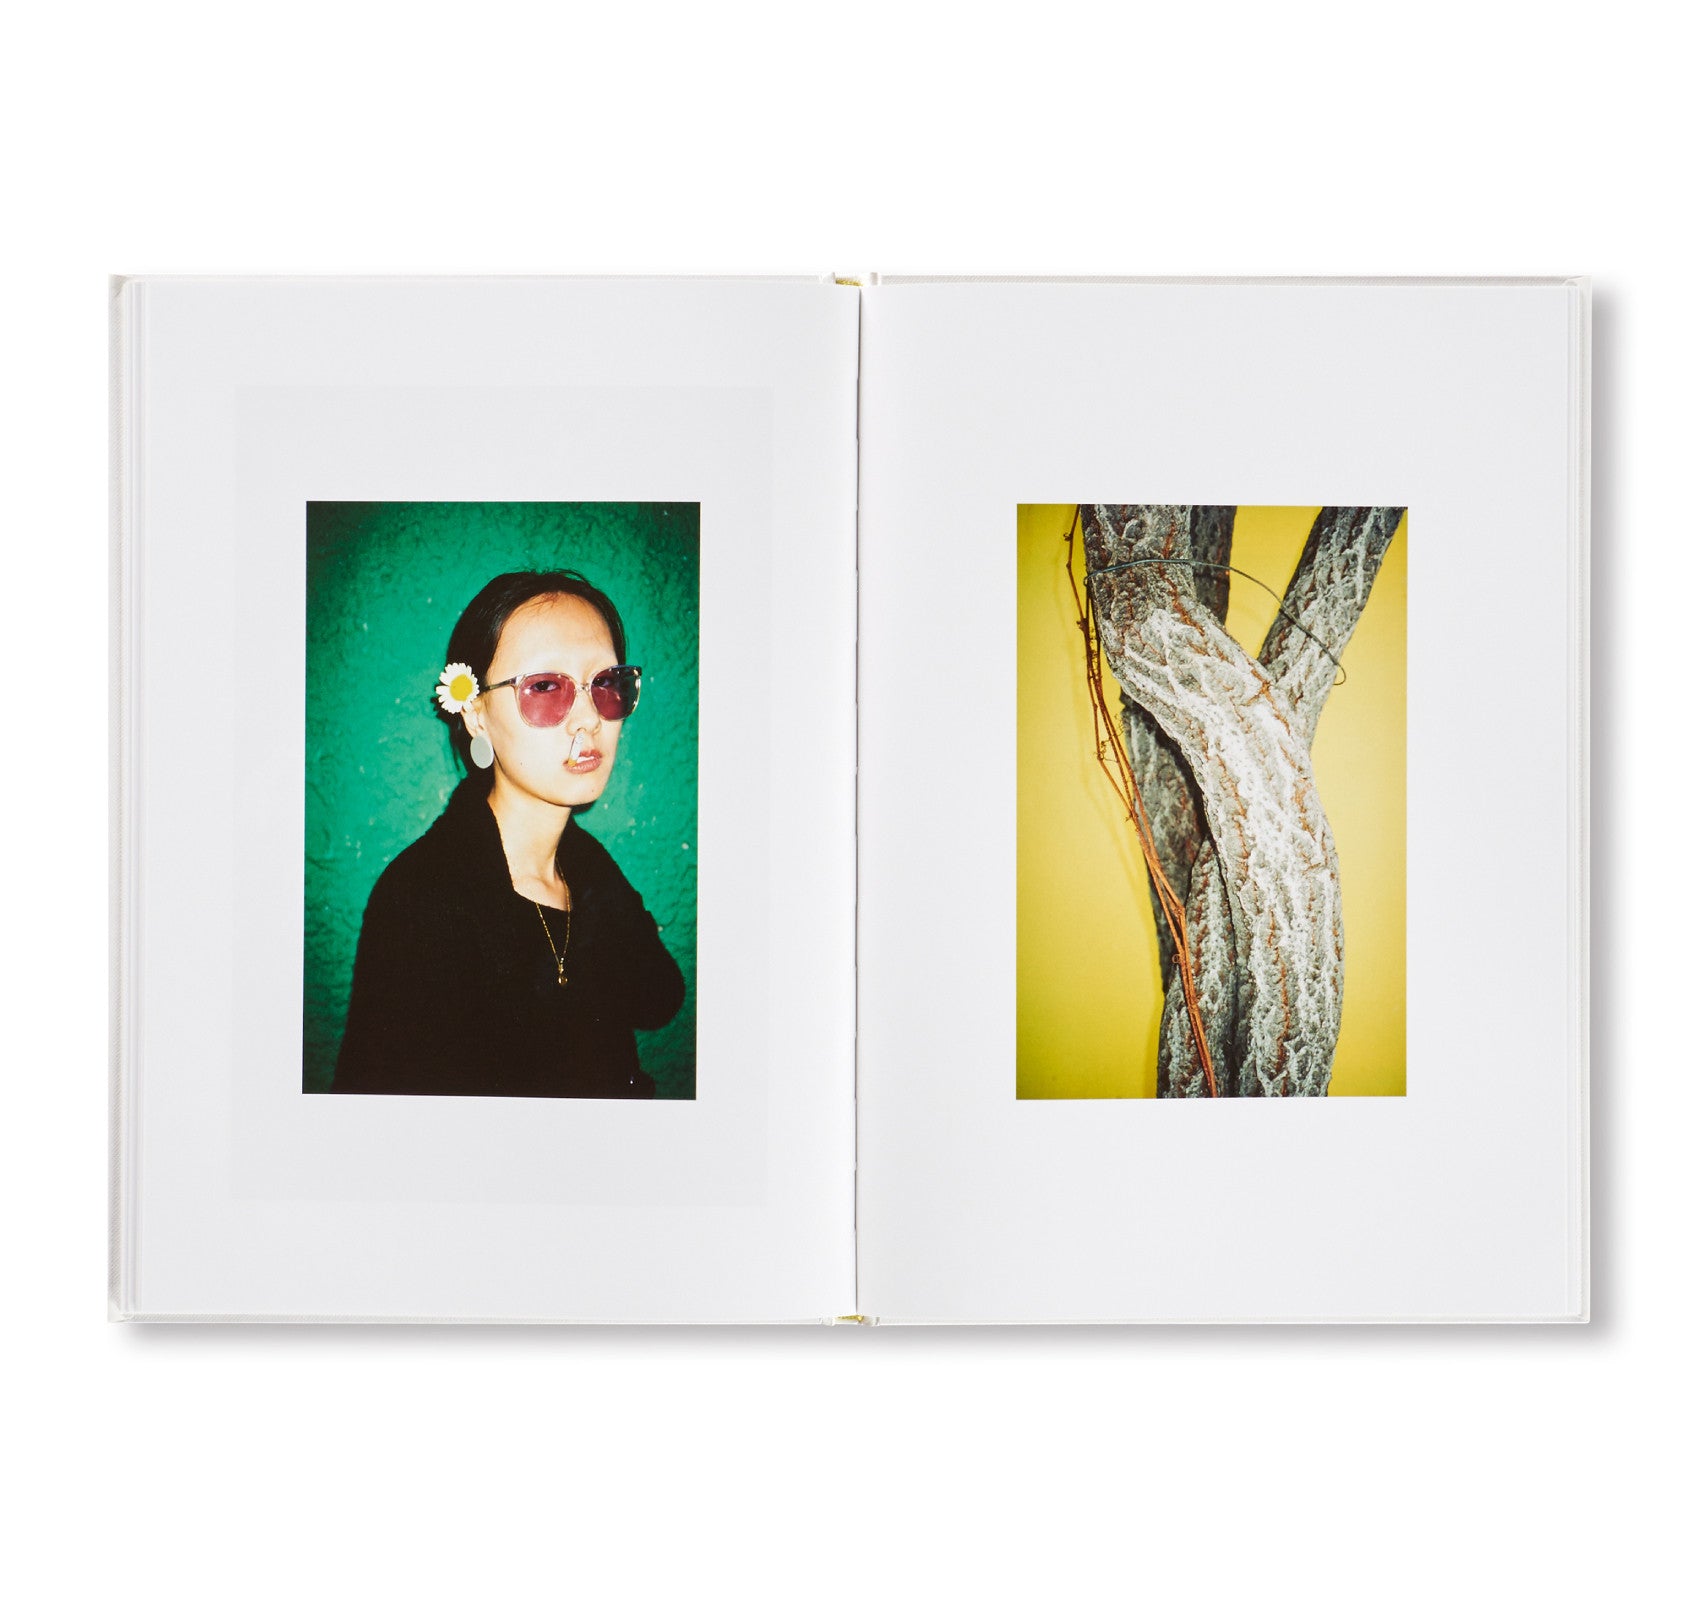 ATHENS LOVE by Ren Hang